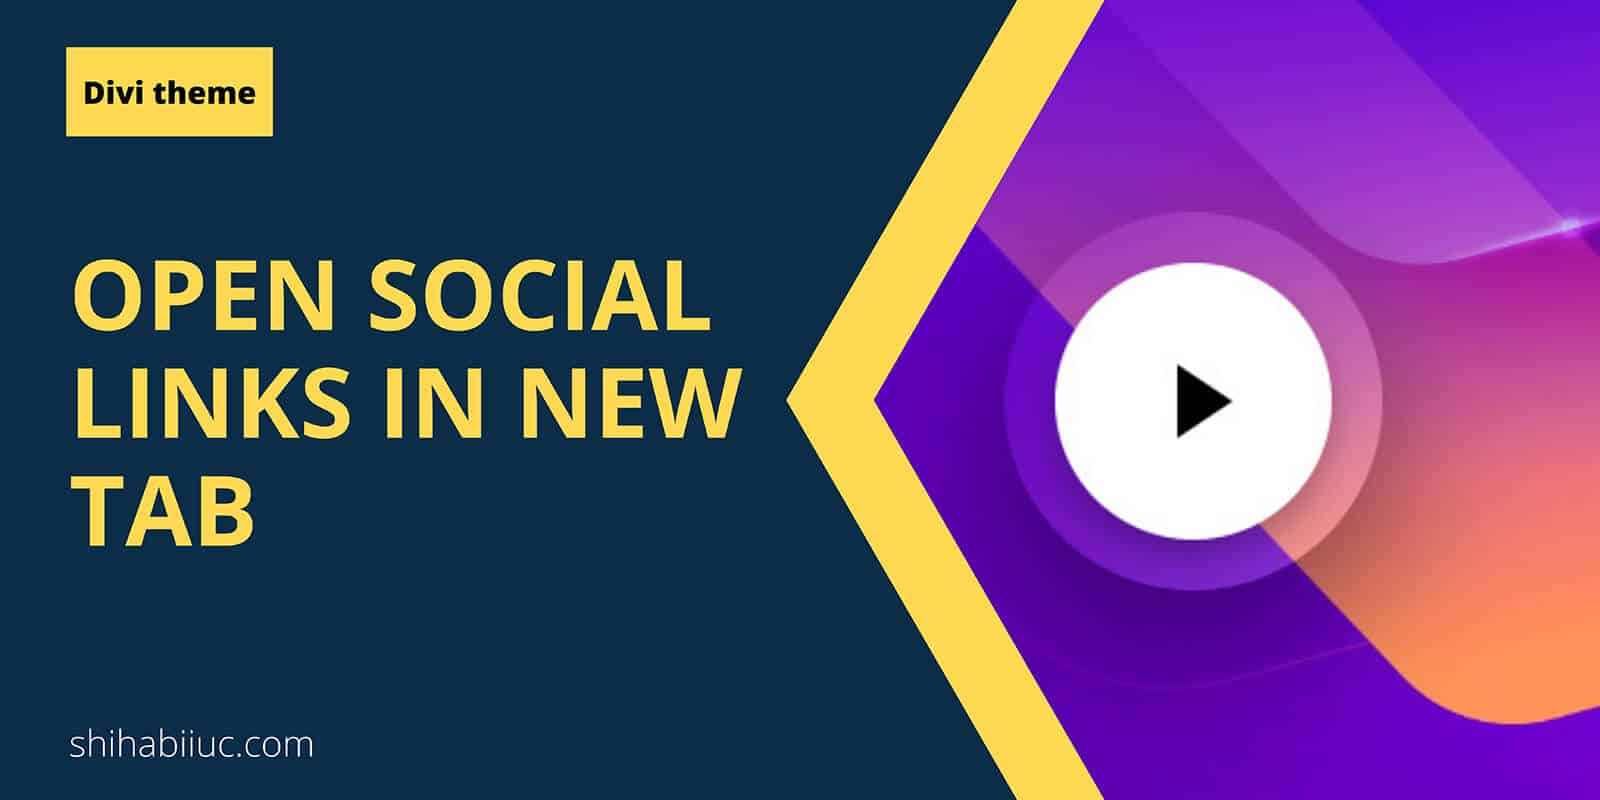 Open social media links in a new tab in Divi theme